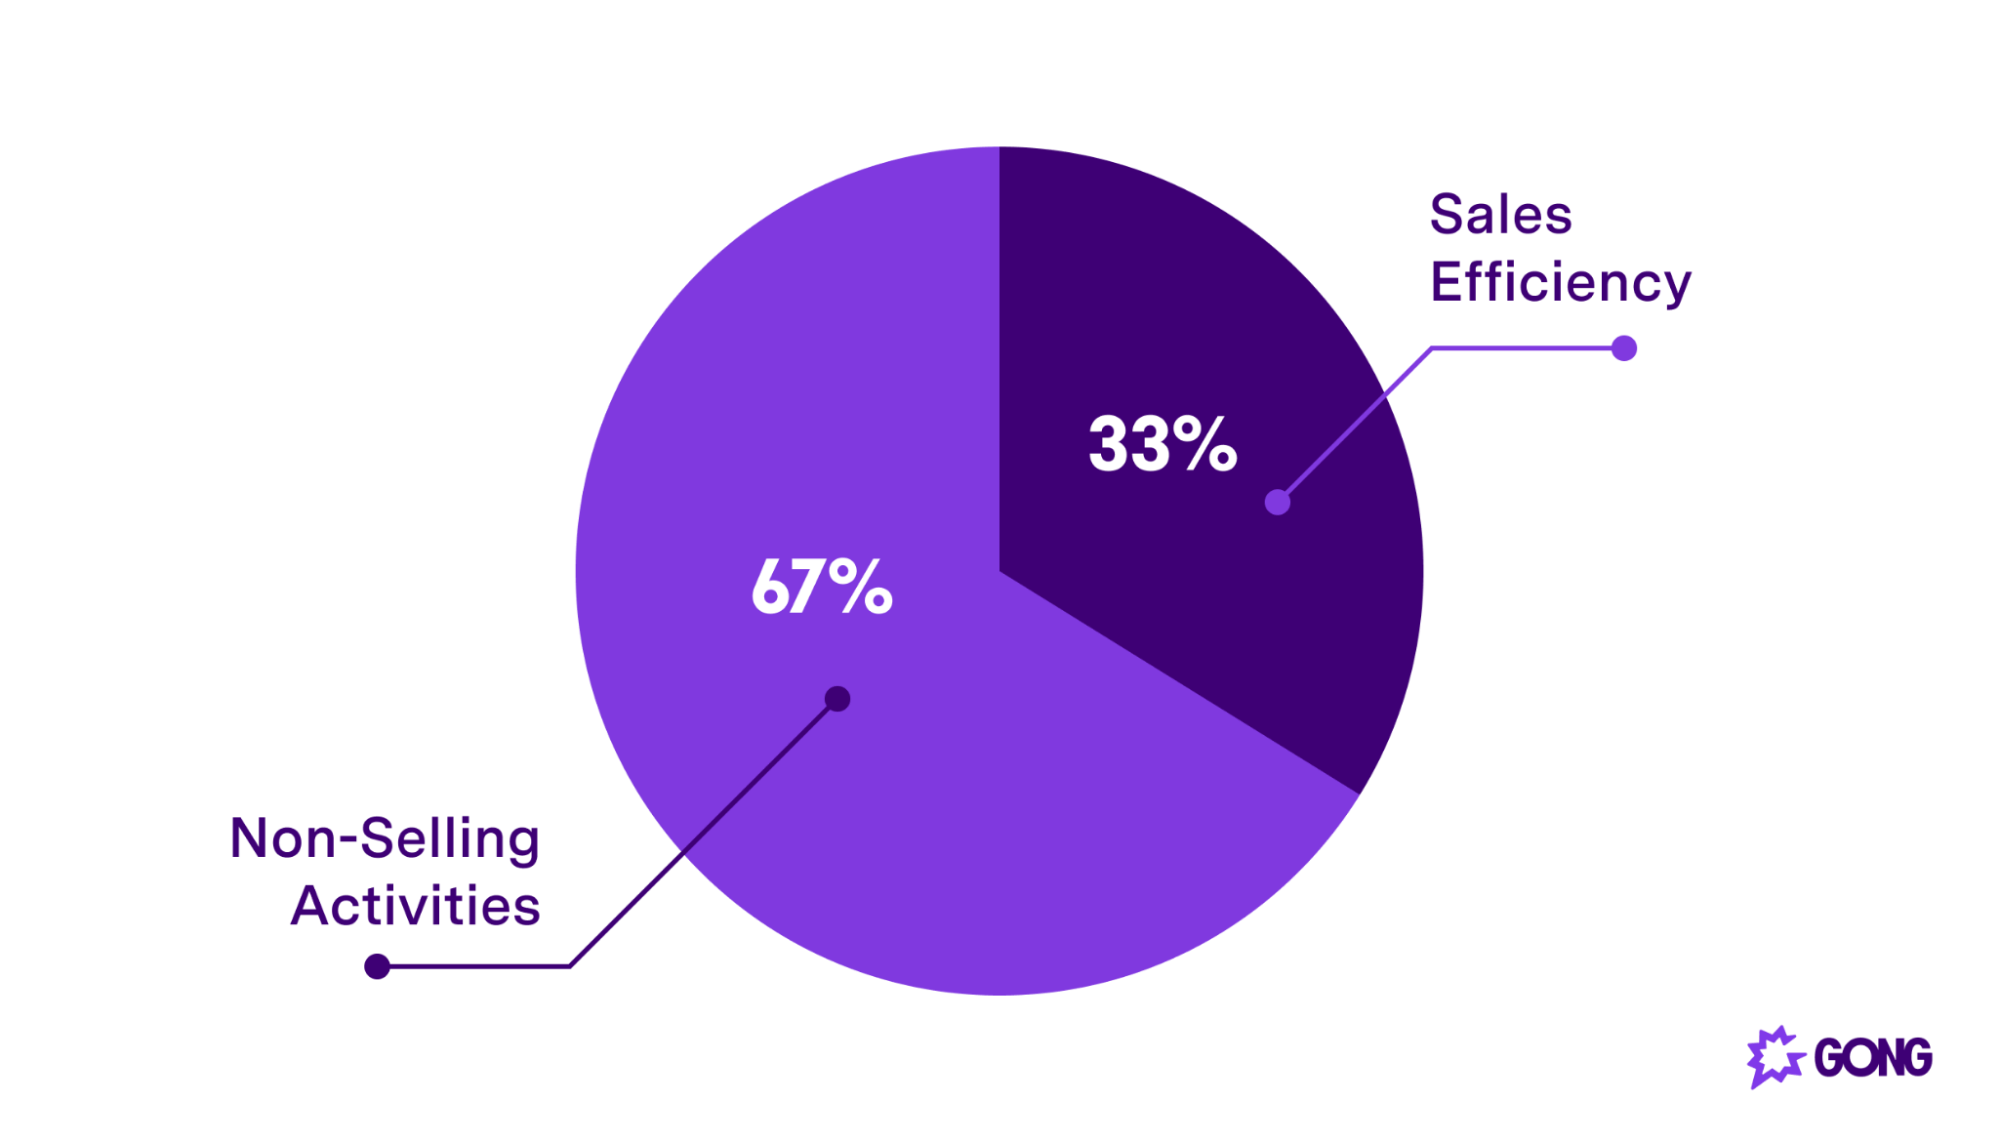 Reps spend two-thirds of their time on non-selling activities